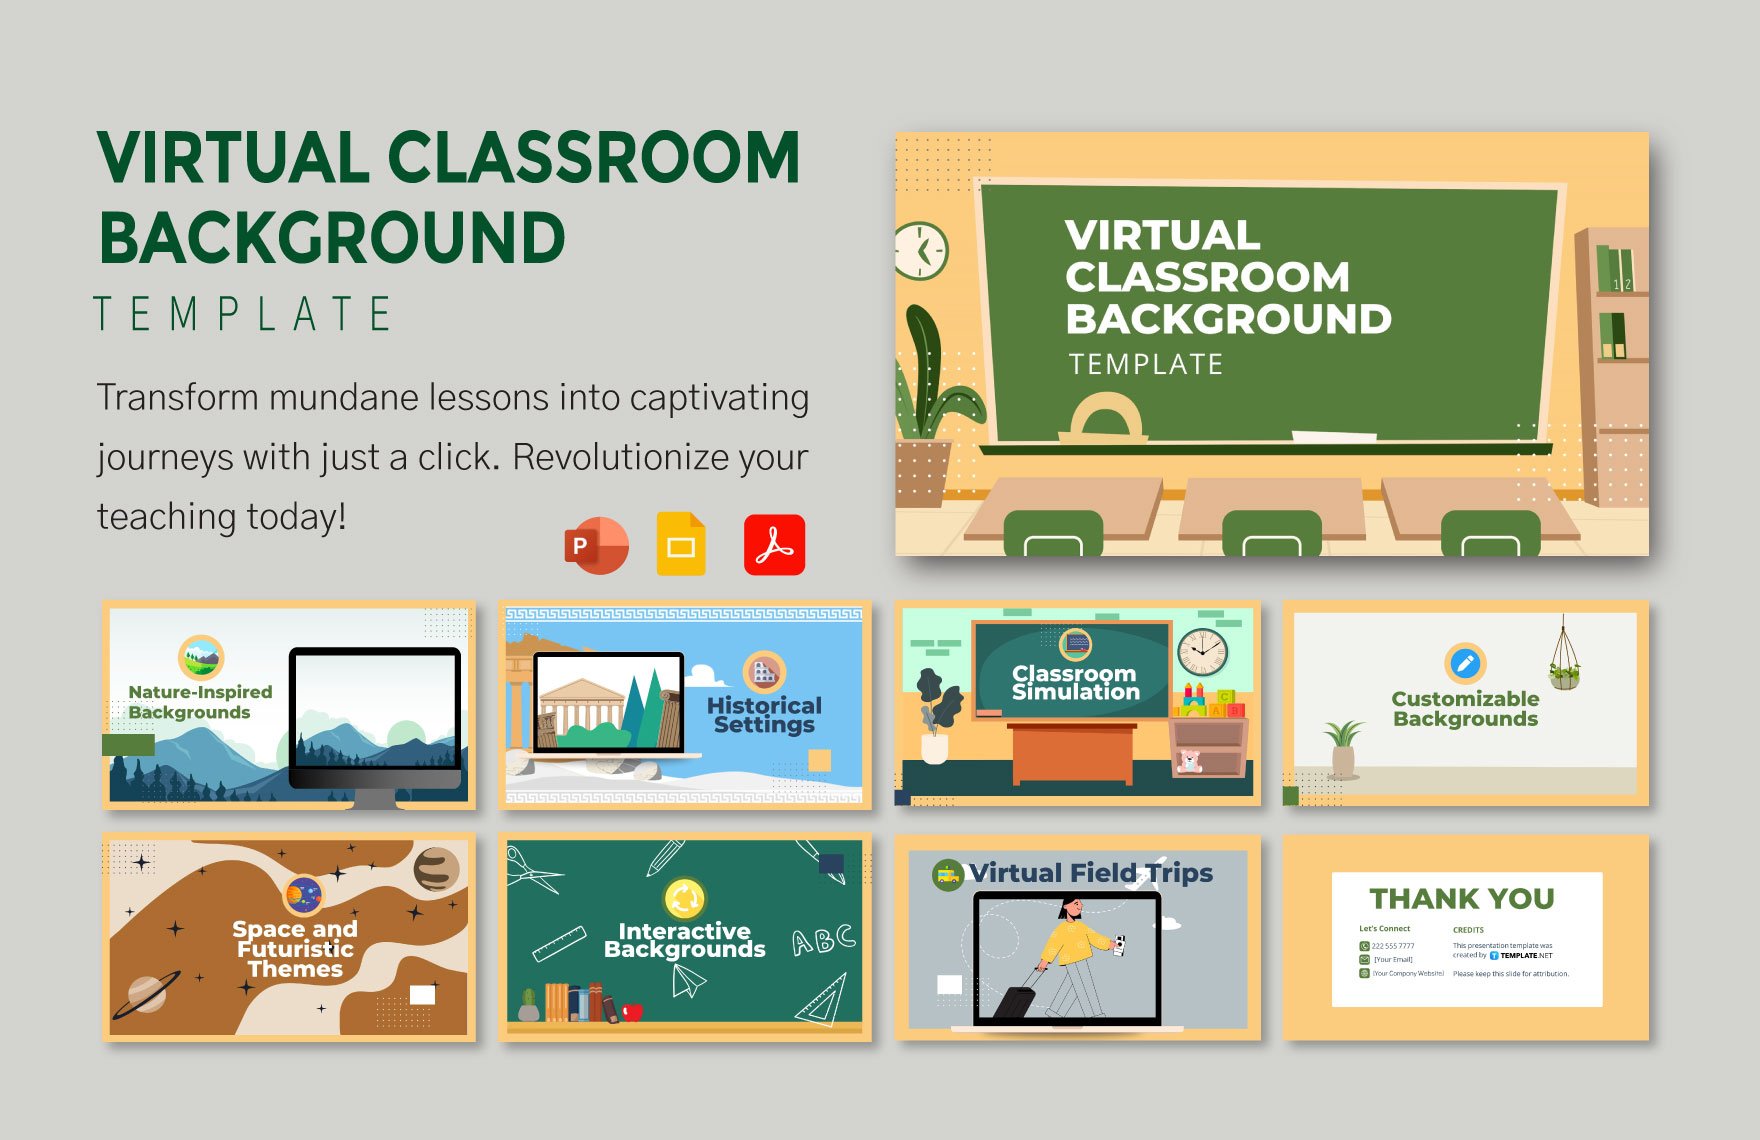 Virtual Classroom Background Template